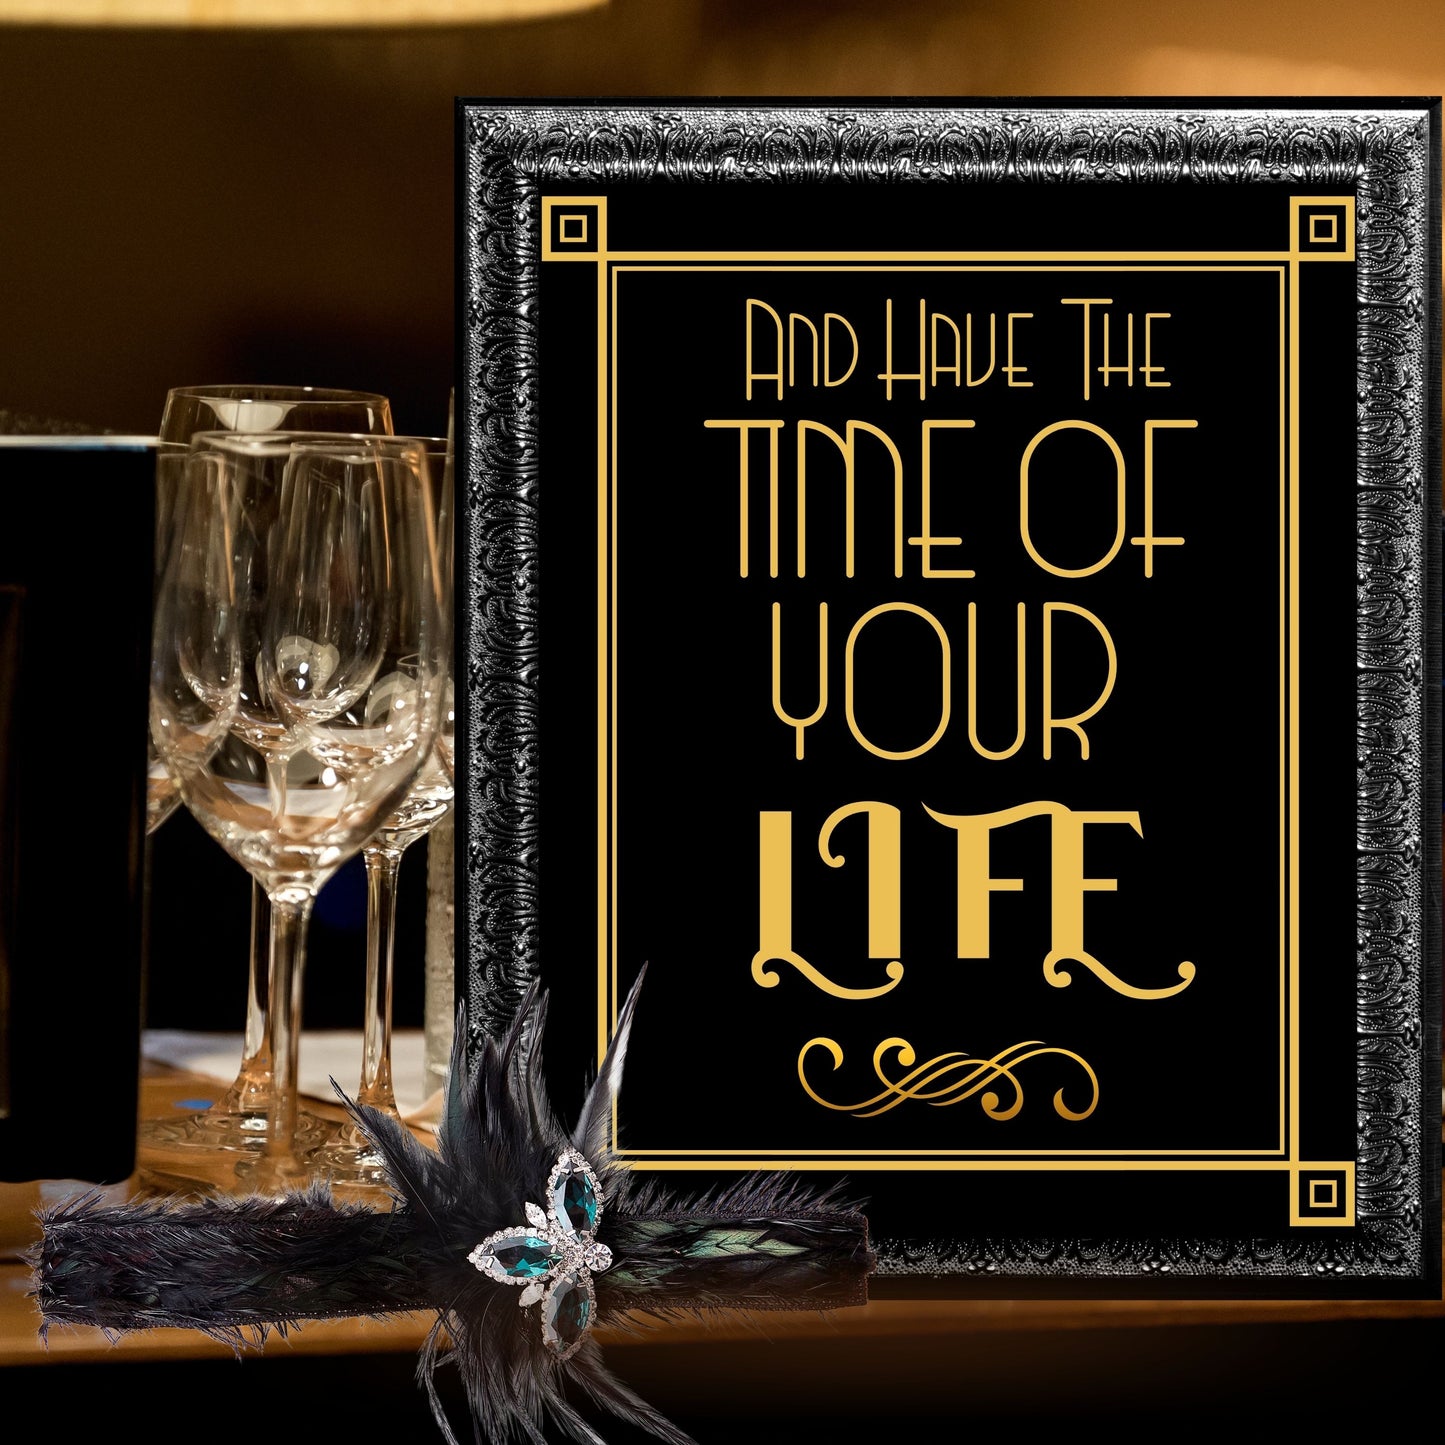 "And Have The Time Of Your Life" Printable Party Sign For Great Gatsby or Roaring 20's Party Or Wedding, Black & Gold, Printable Party Decor